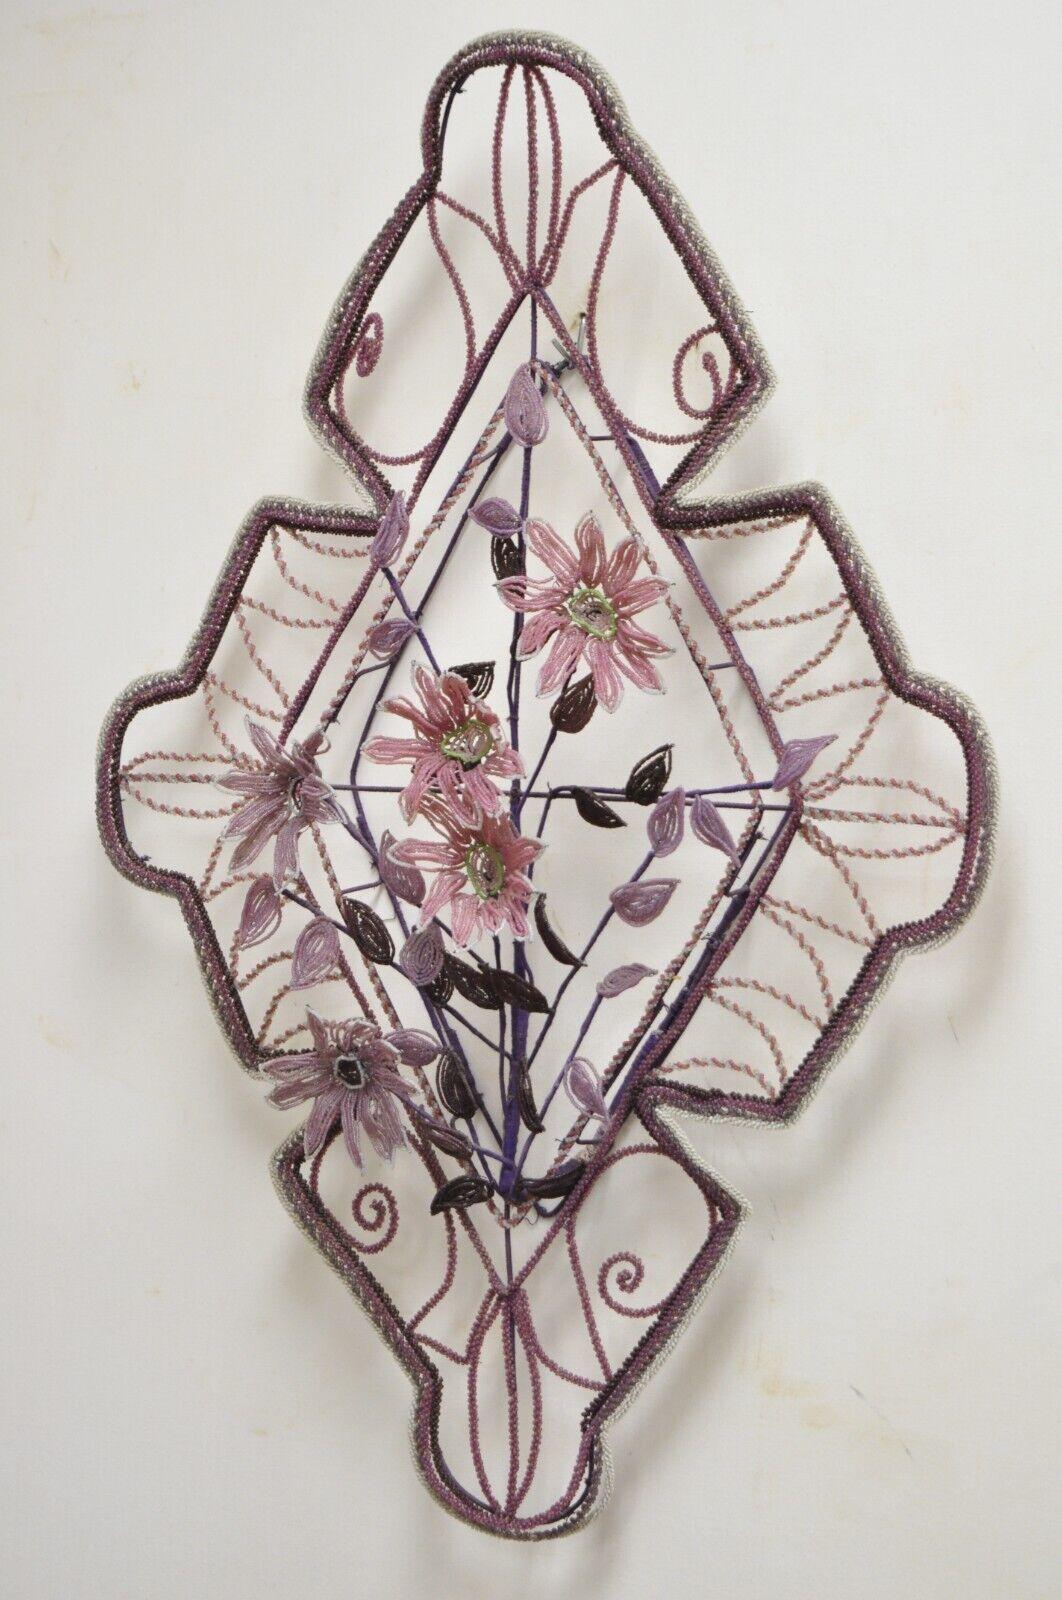 French Victorian glass beaded purple flower casket wreath wall sculpture (B). Item featured hand beaded in France with glass beads with impressive flower detail, very nice antique item, great style and form. Circa 19th Century. Measurements: 38